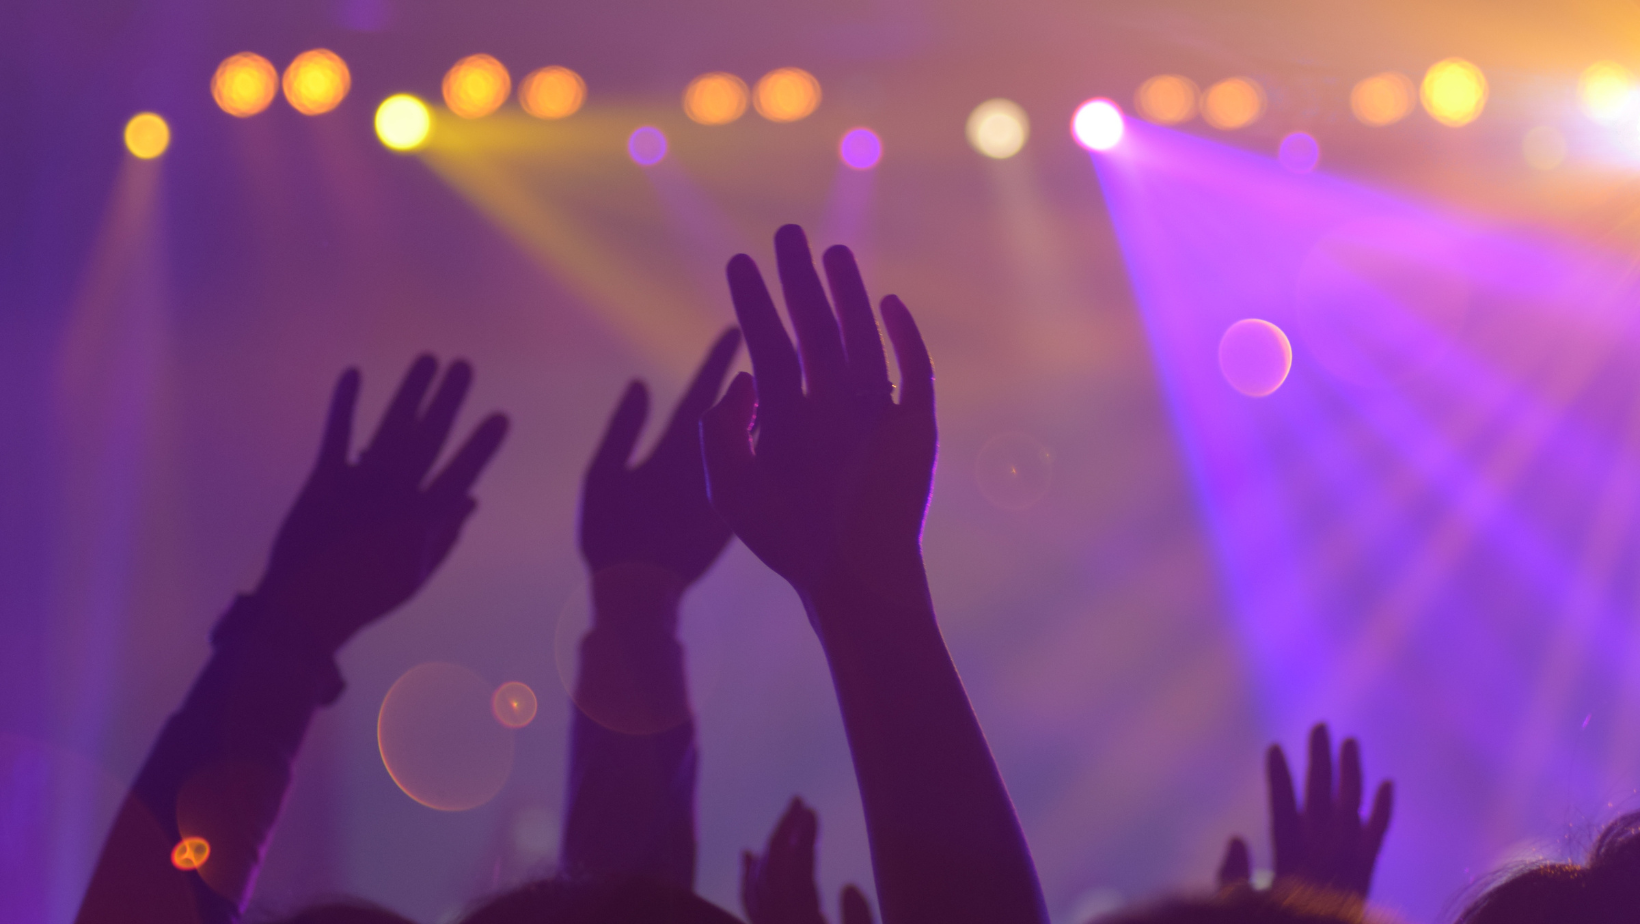 Image of hands waving in the air at a concert.